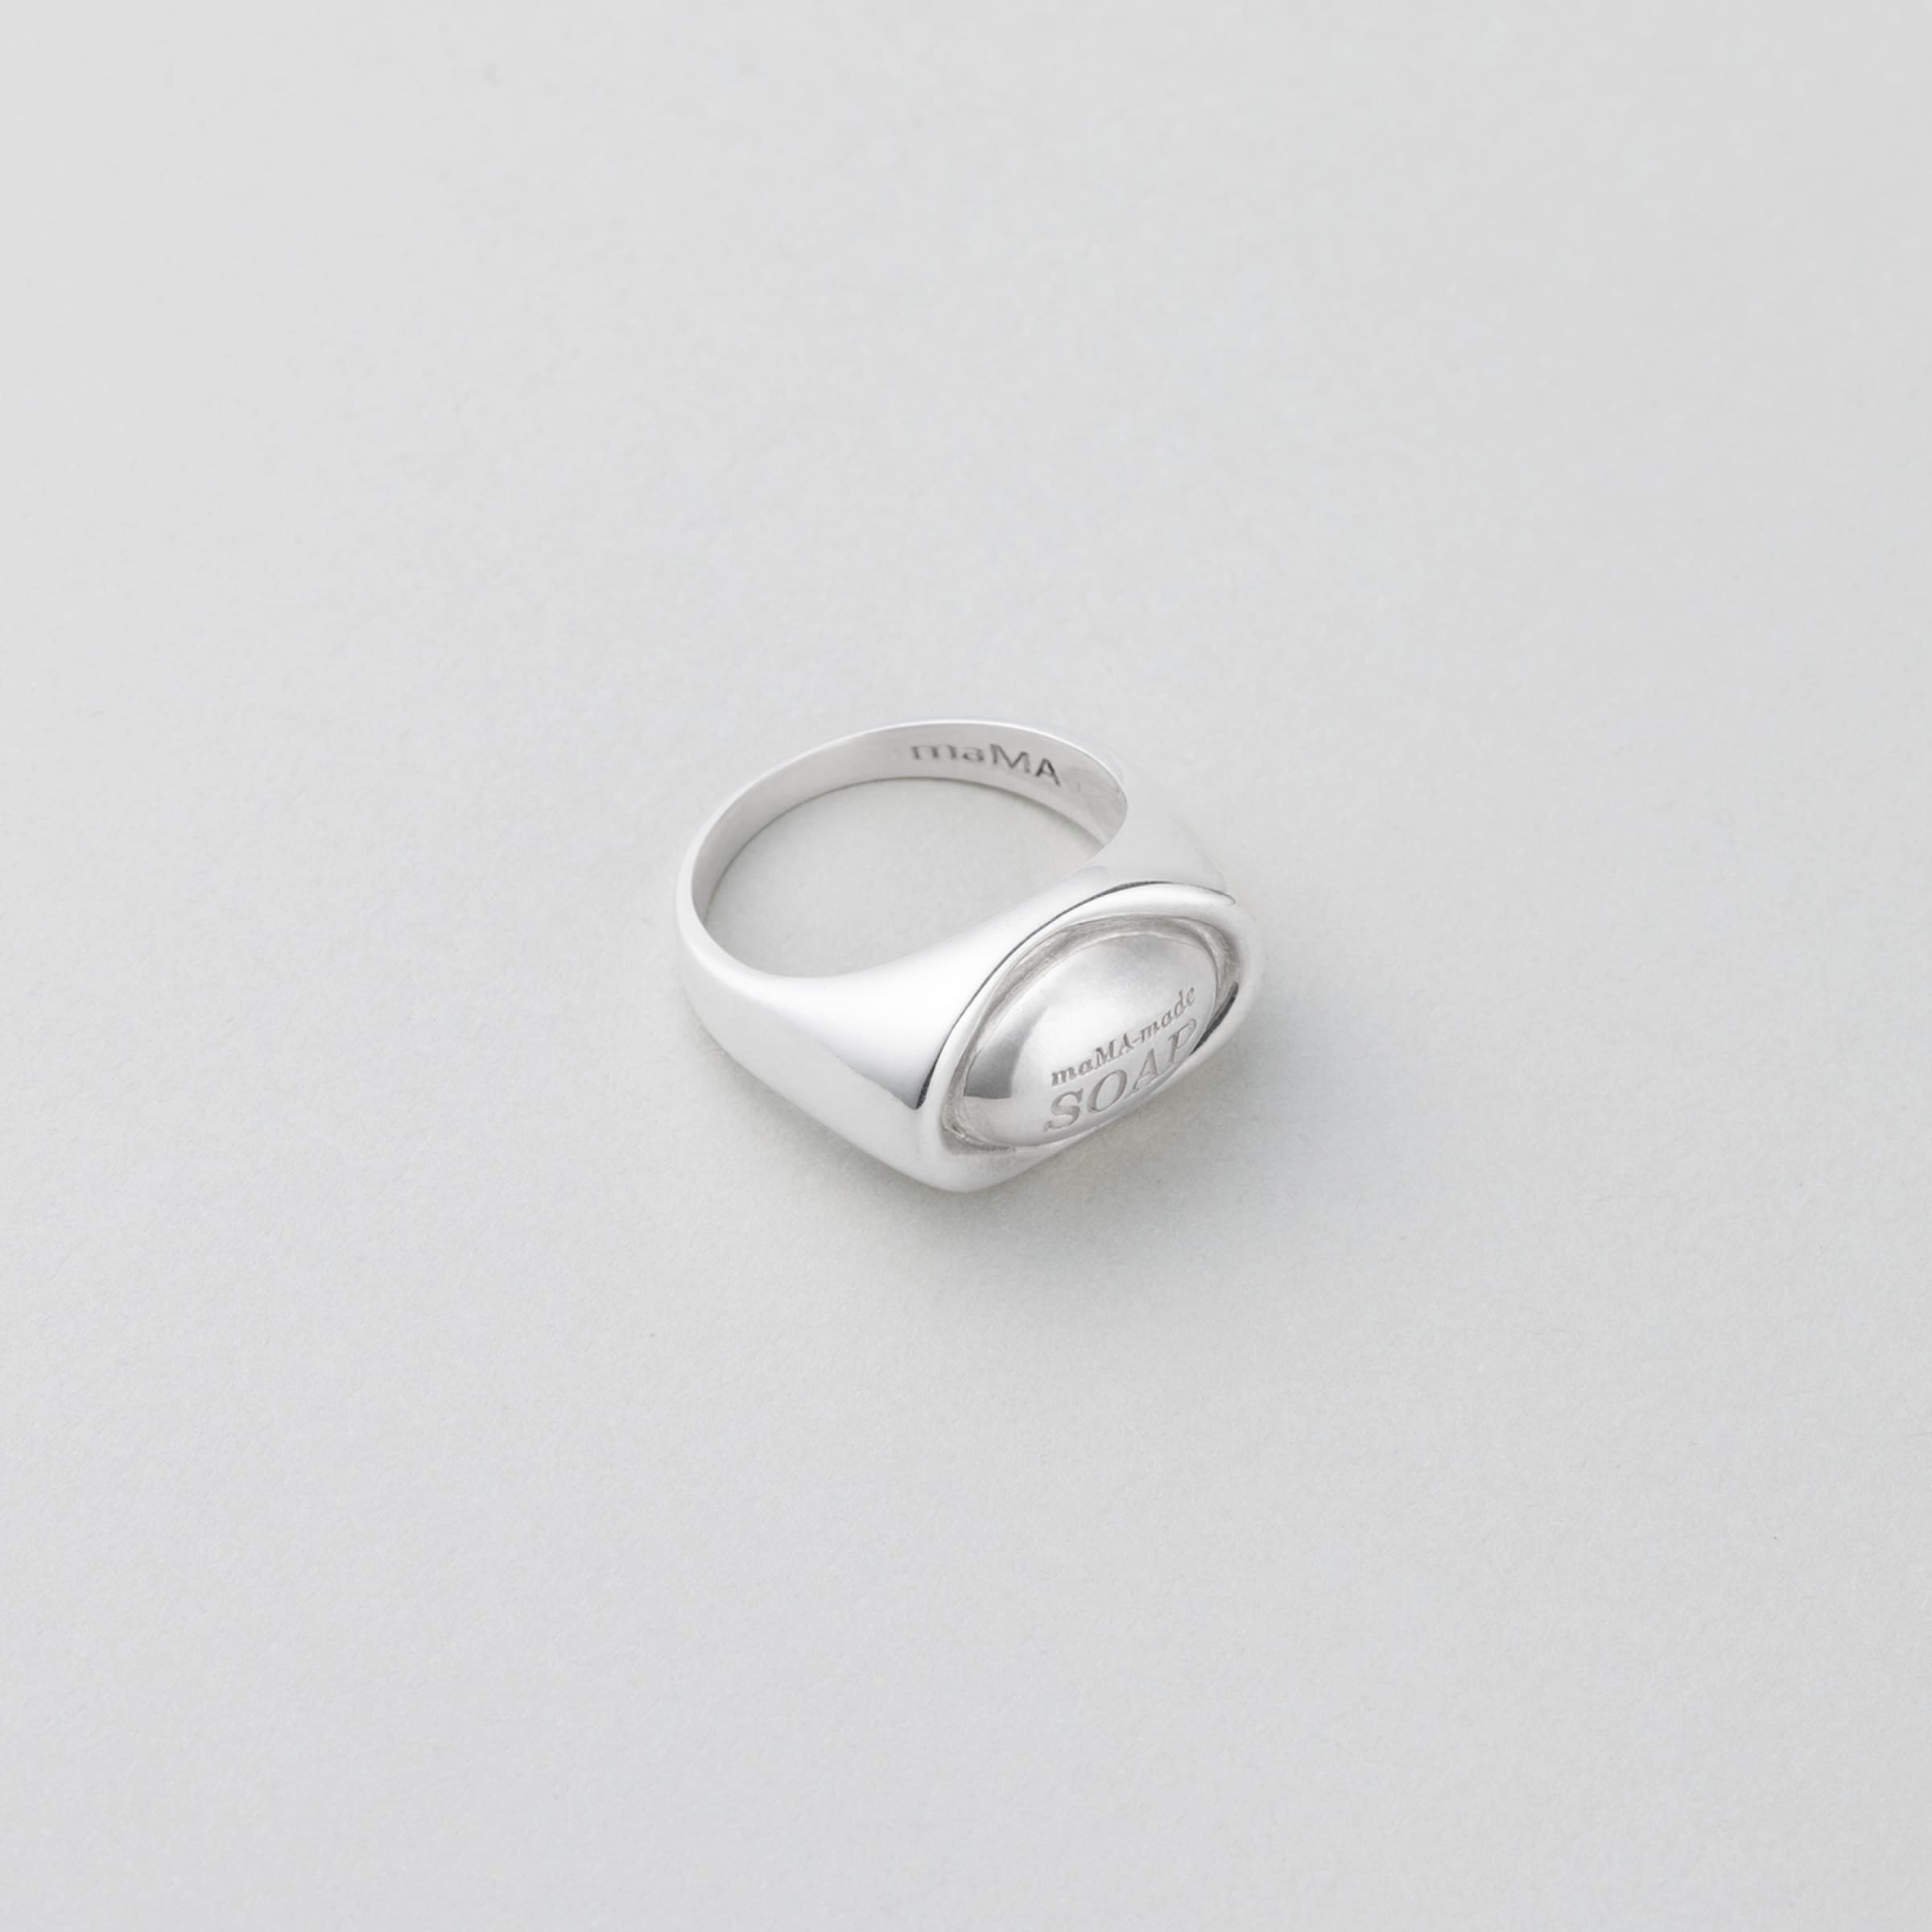 SOAPY ボリューム オーバル シルバー ピンキー リング / SOAPY VOLUME OVAL SILVER RING